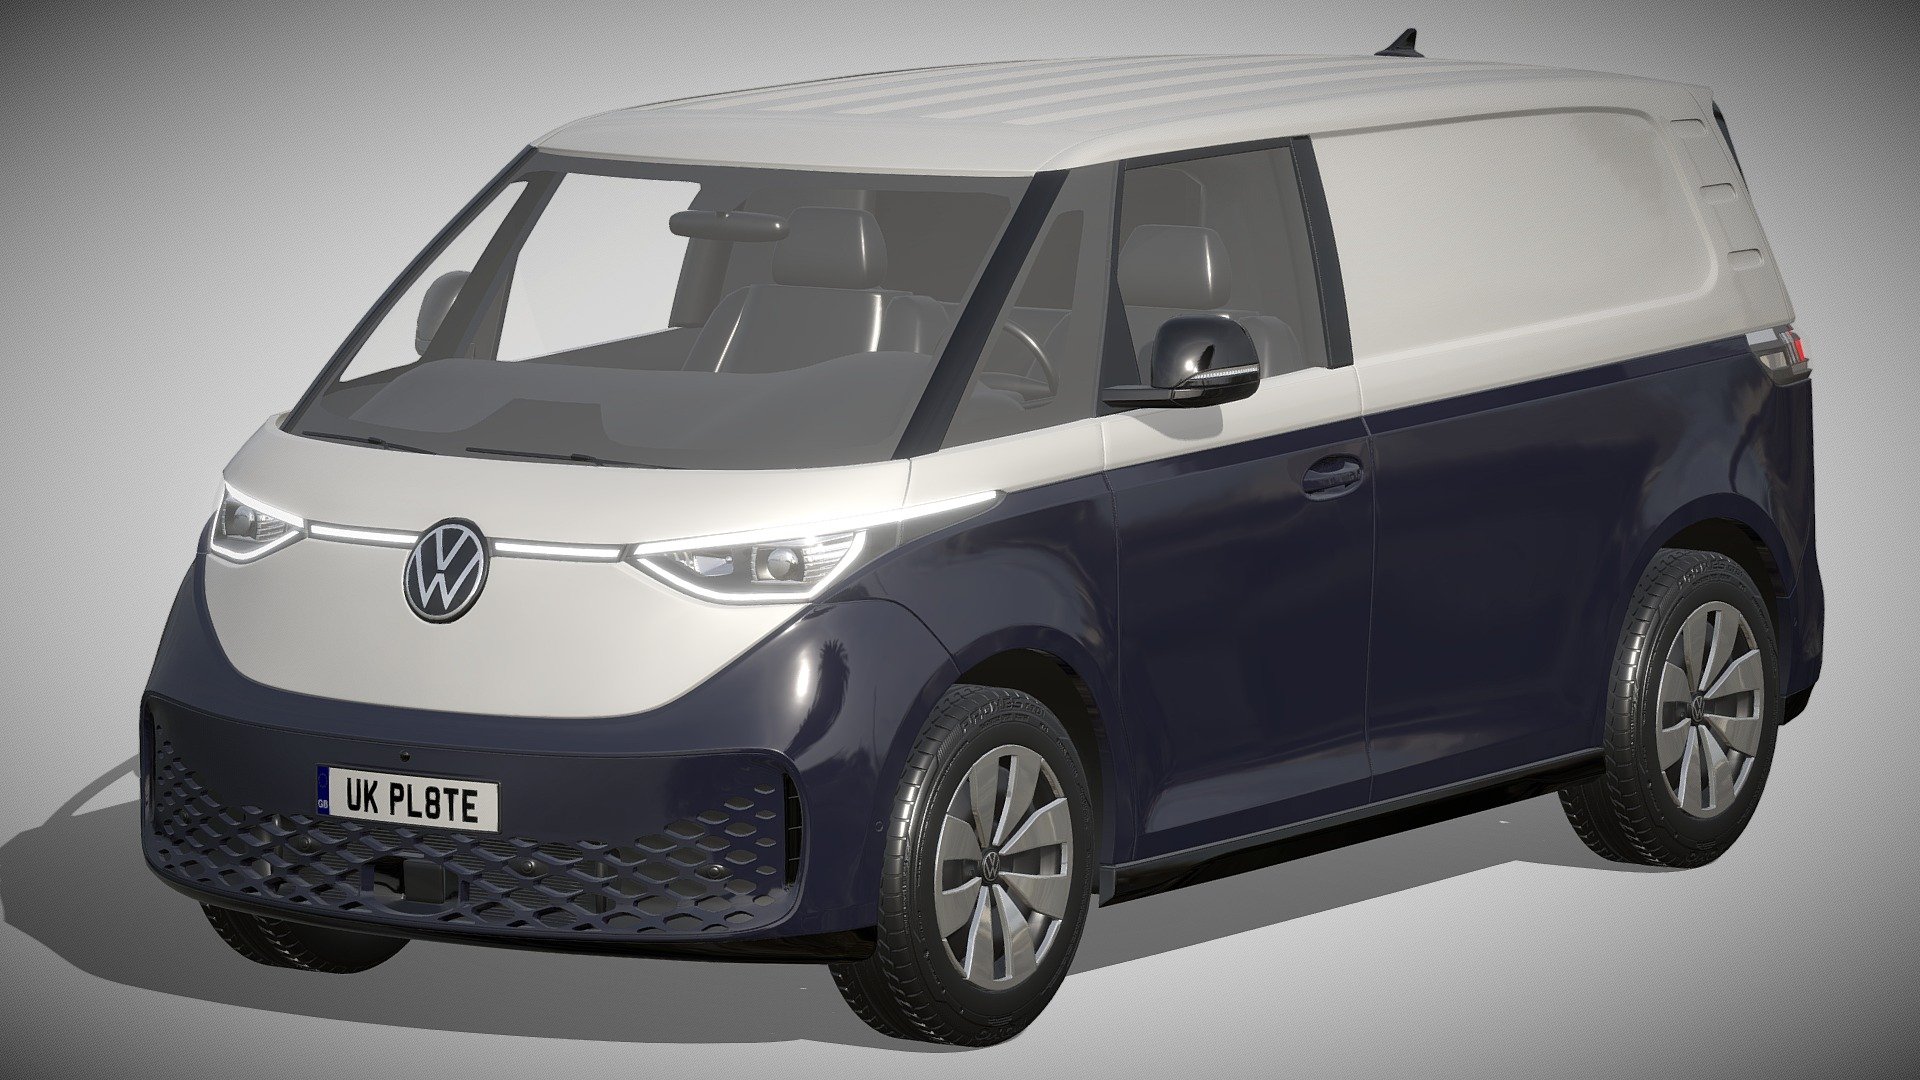 Volkswagen ID. Buzz Cargo 2023

https://www.volkswagen-nutzfahrzeuge.de/de/modelle/id-buzz.html

Clean geometry Light weight model, yet completely detailed for HI-Res renders. Use for movies, Advertisements or games

Corona render and materials

All textures include in *.rar files

Lighting setup is not included in the file! - Volkswagen ID. Buzz Cargo 2023 - Buy Royalty Free 3D model by zifir3d 3d model